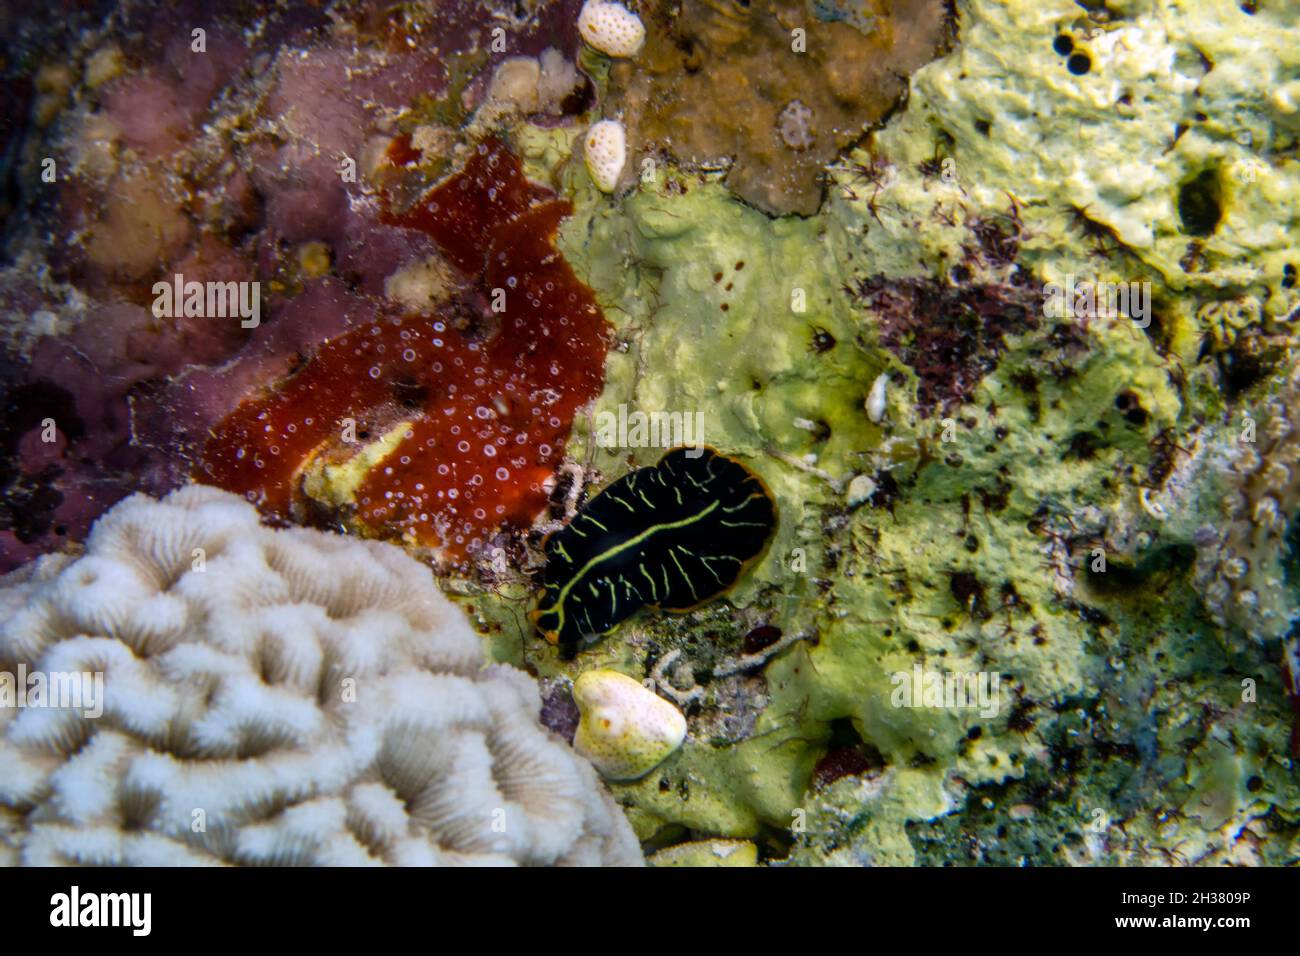 A Divided Flatworm (Pseudoceros dimidiatus) in the Red Sea Stock Photo